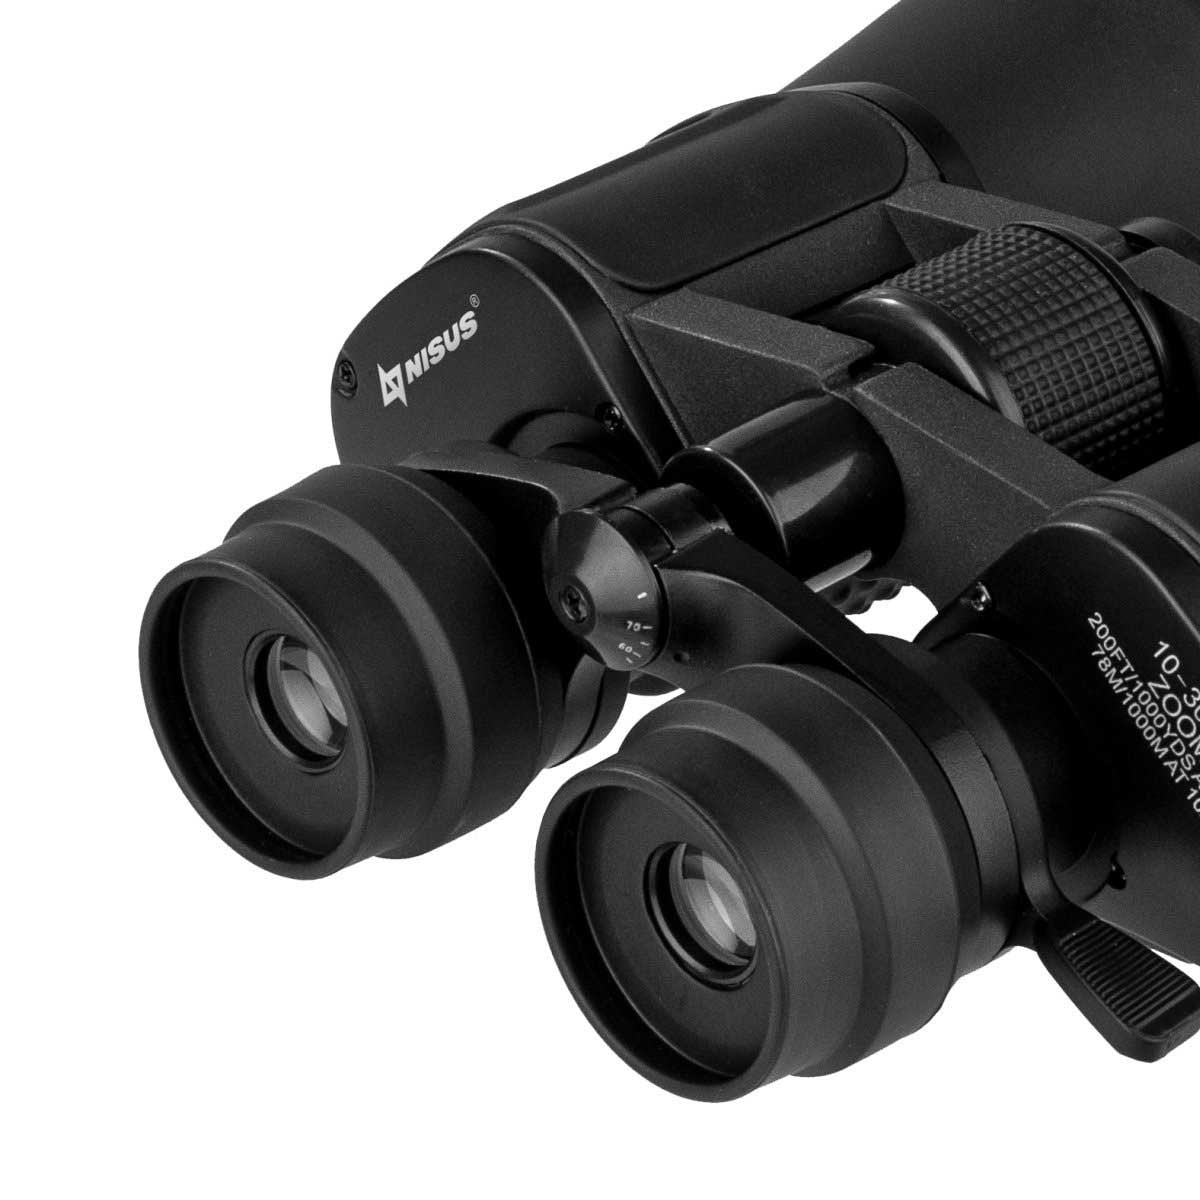 10x50 Nisus Compact Binocular Black Color equipped with durable lenses